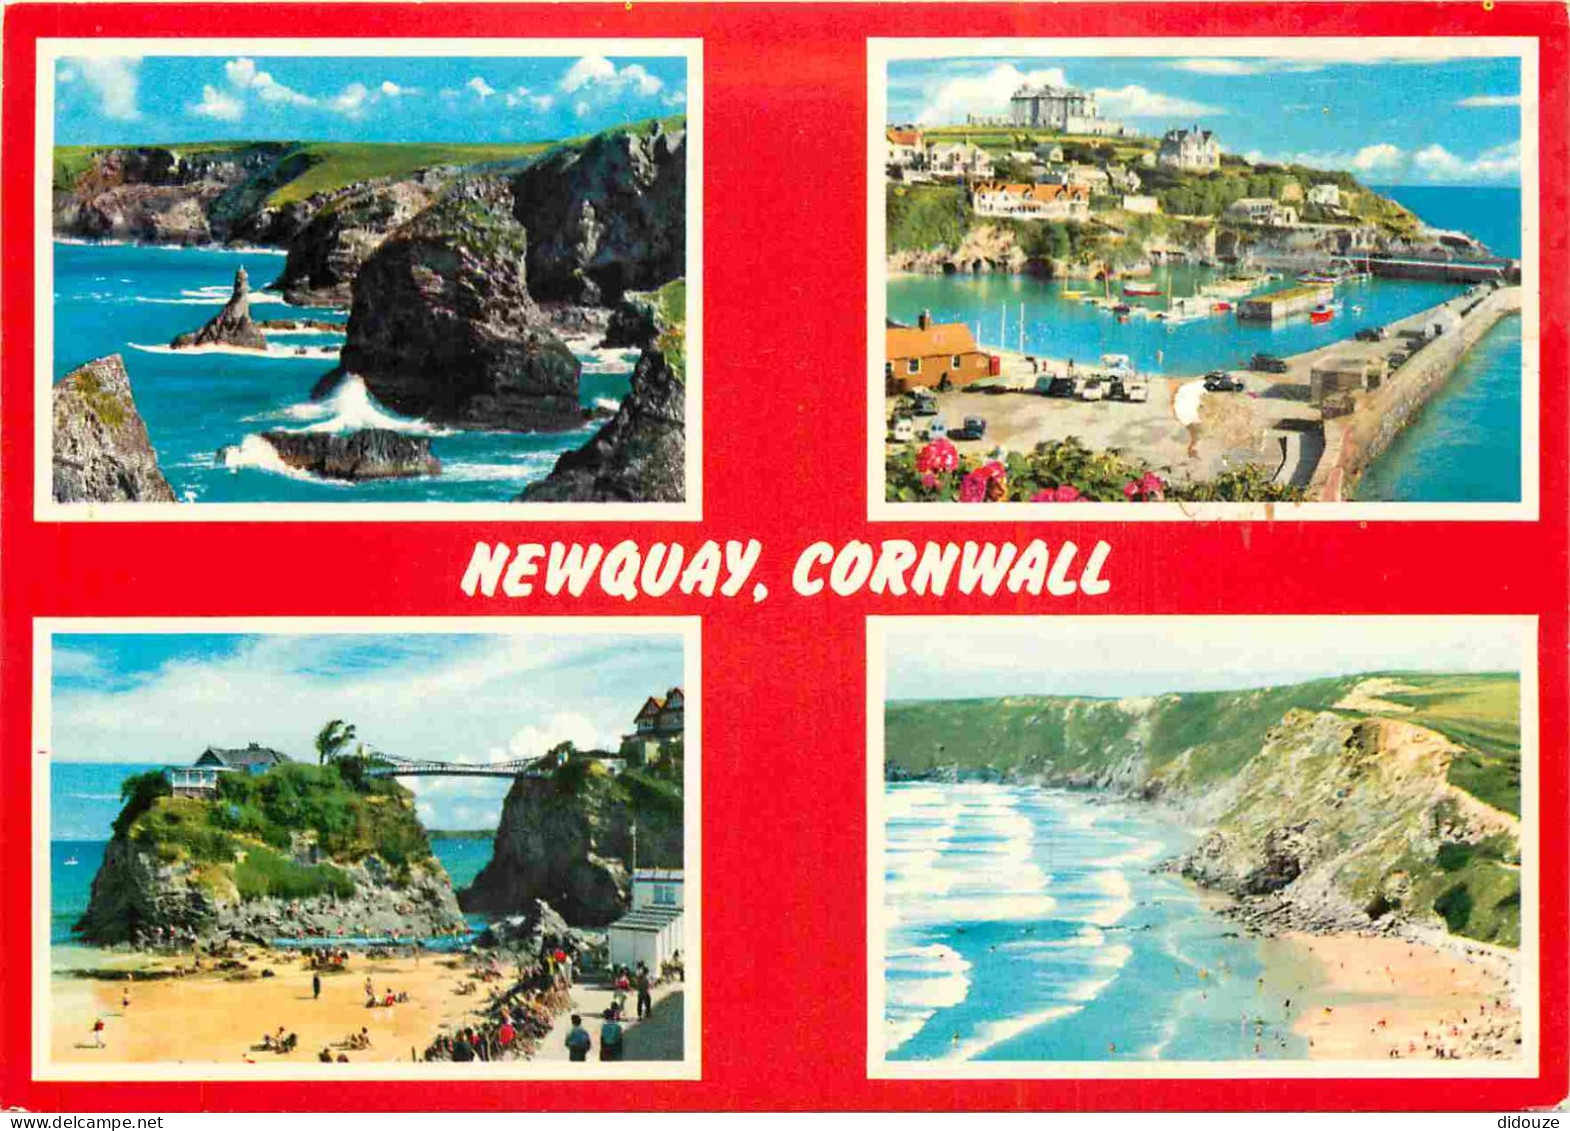 Angleterre - Newquay - Multivues - Cornwall - Scilly Isles - England - Royaume Uni - UK - United Kingdom - CPM - Carte N - Newquay